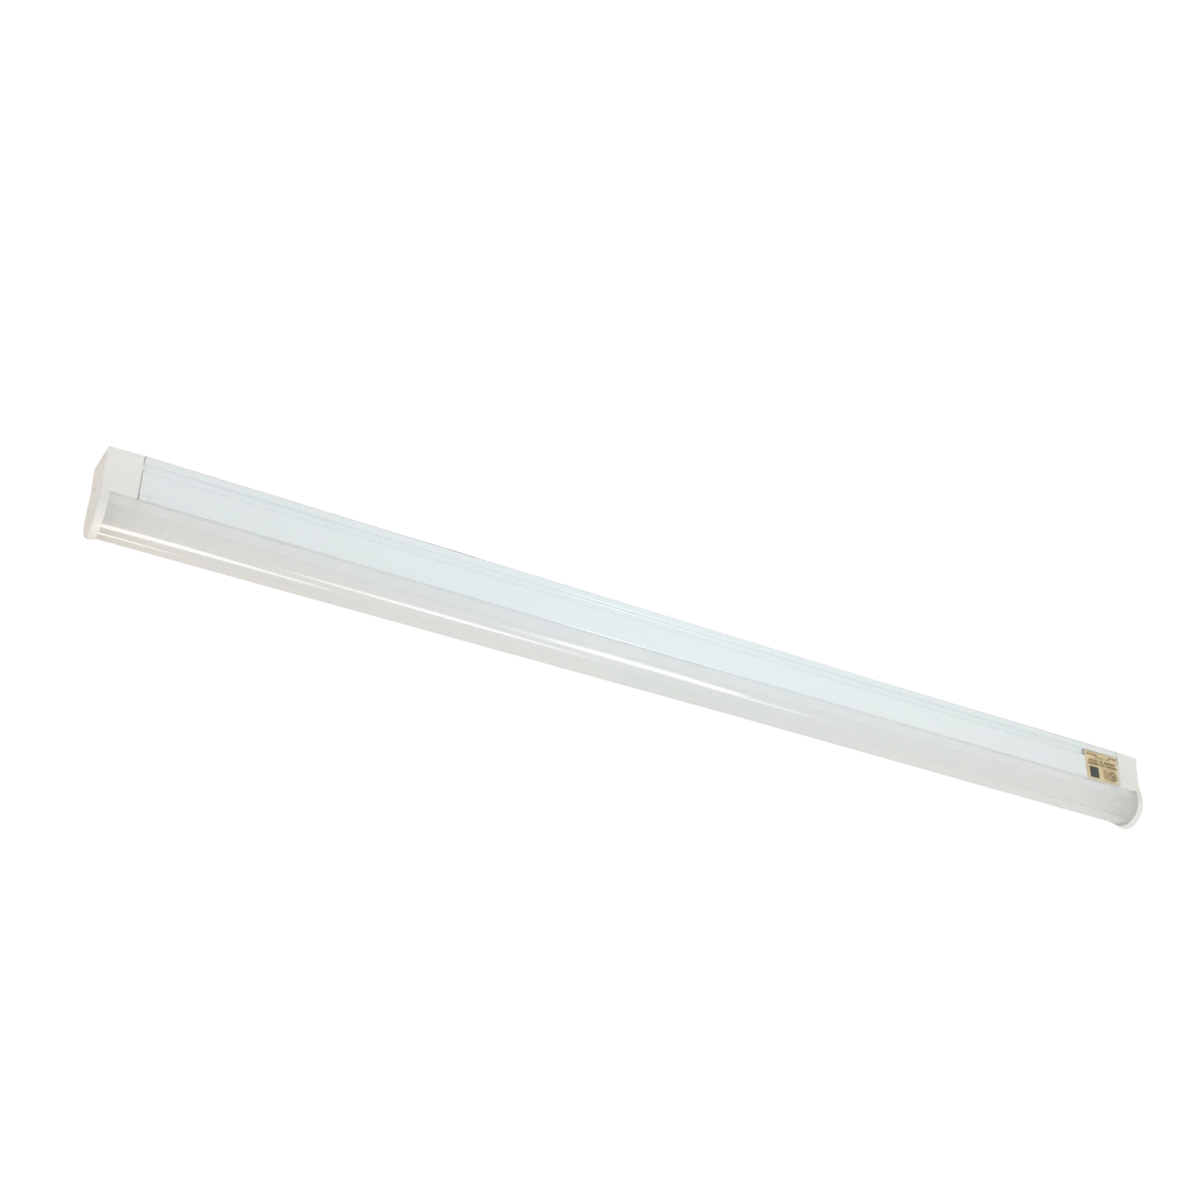 Picture of Nora Lighting NULS-LED3340W 33 in. 4000K Undercabinet Linear LED Fixture - White